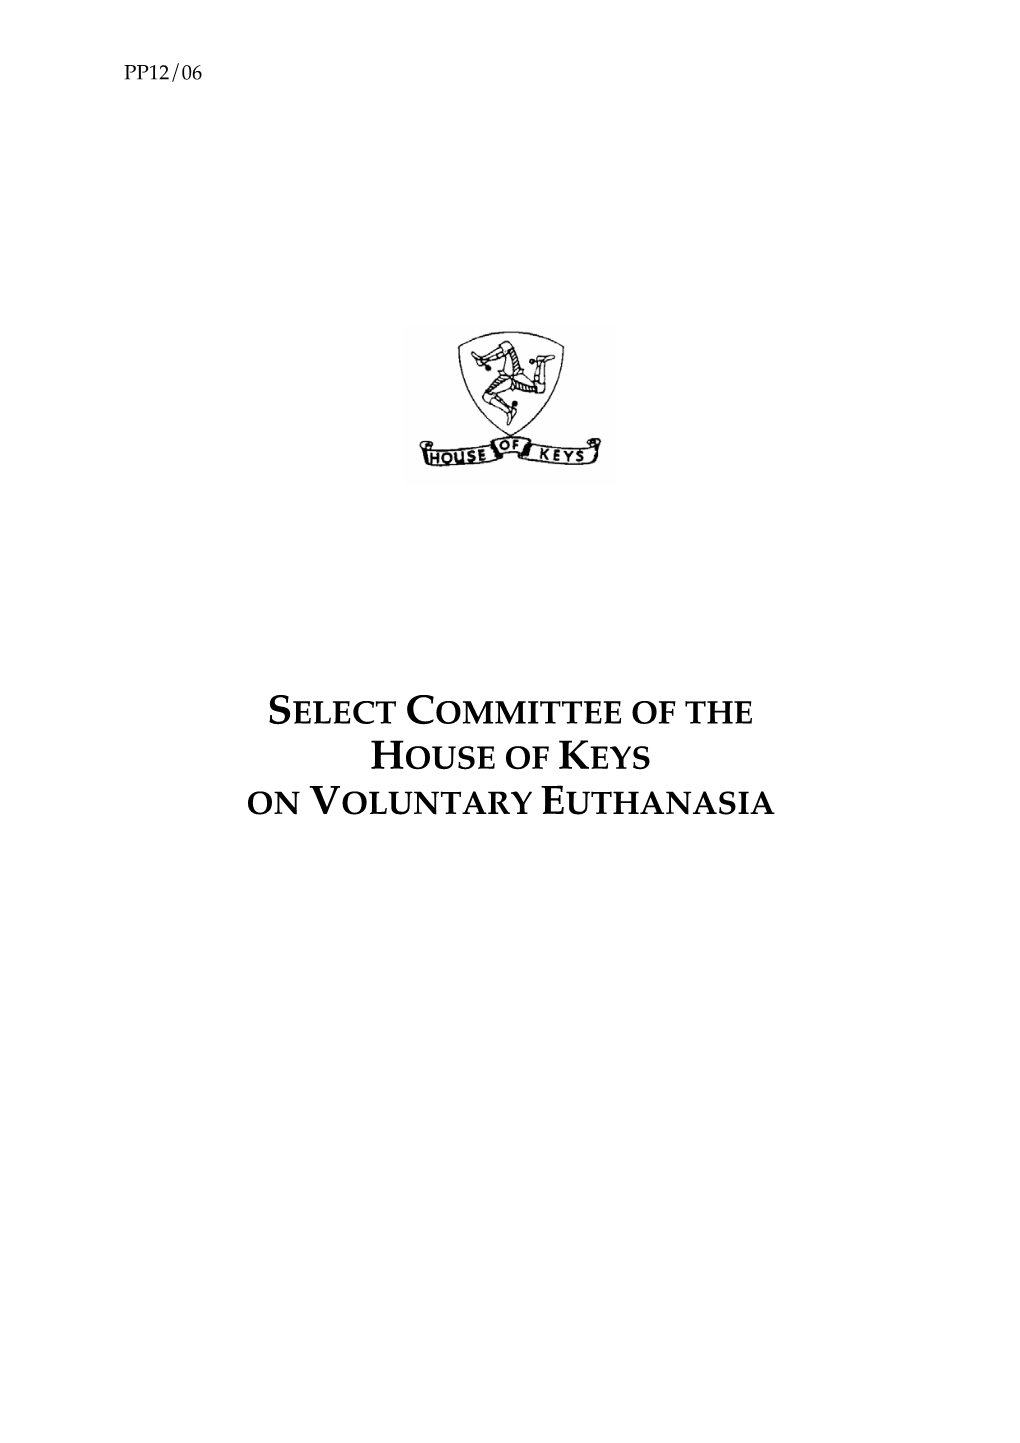 Select Committee of the House of Keys on Voluntary Euthanasia